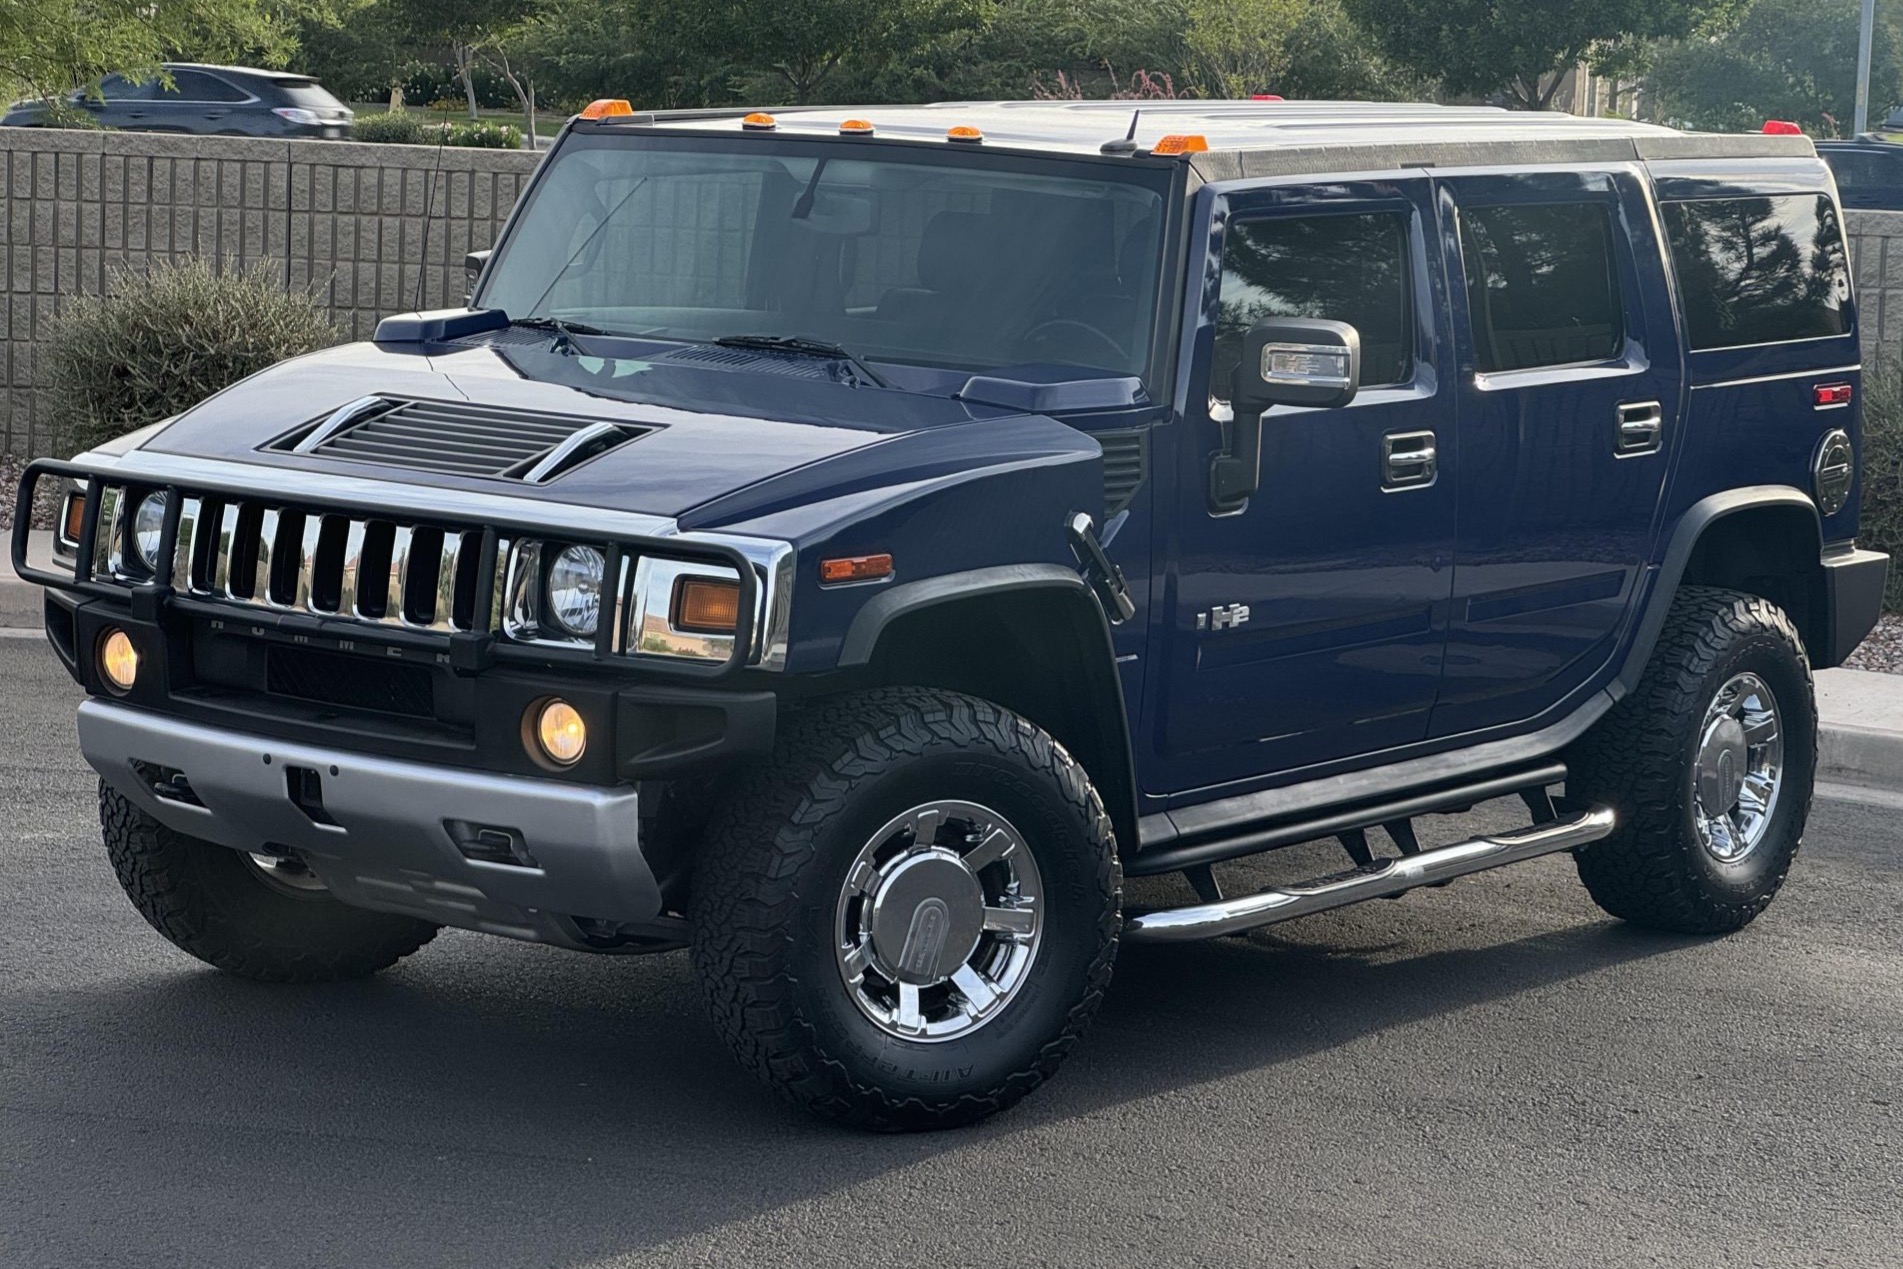 Used 2008 Hummer H2 Review